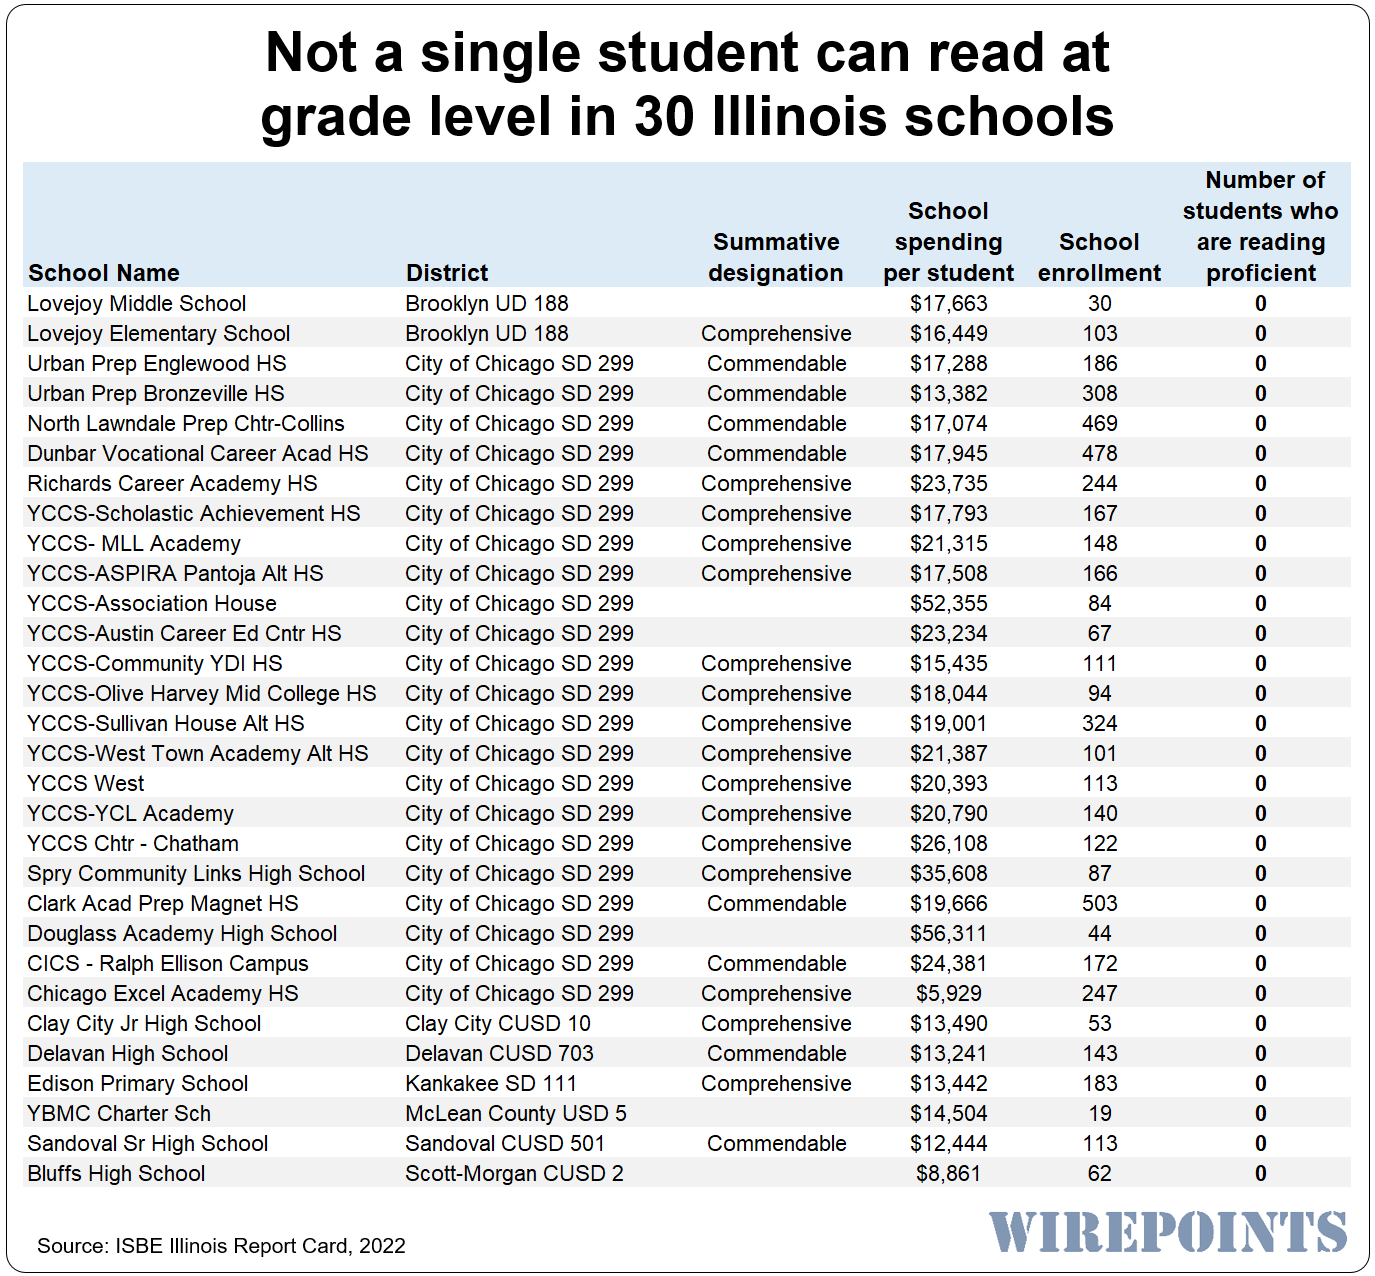 https://wirepoints.org/wp-content/uploads/2023/02/Not-a-single-student-can-read-at-grade-level-in-30-Illinois-schools.png